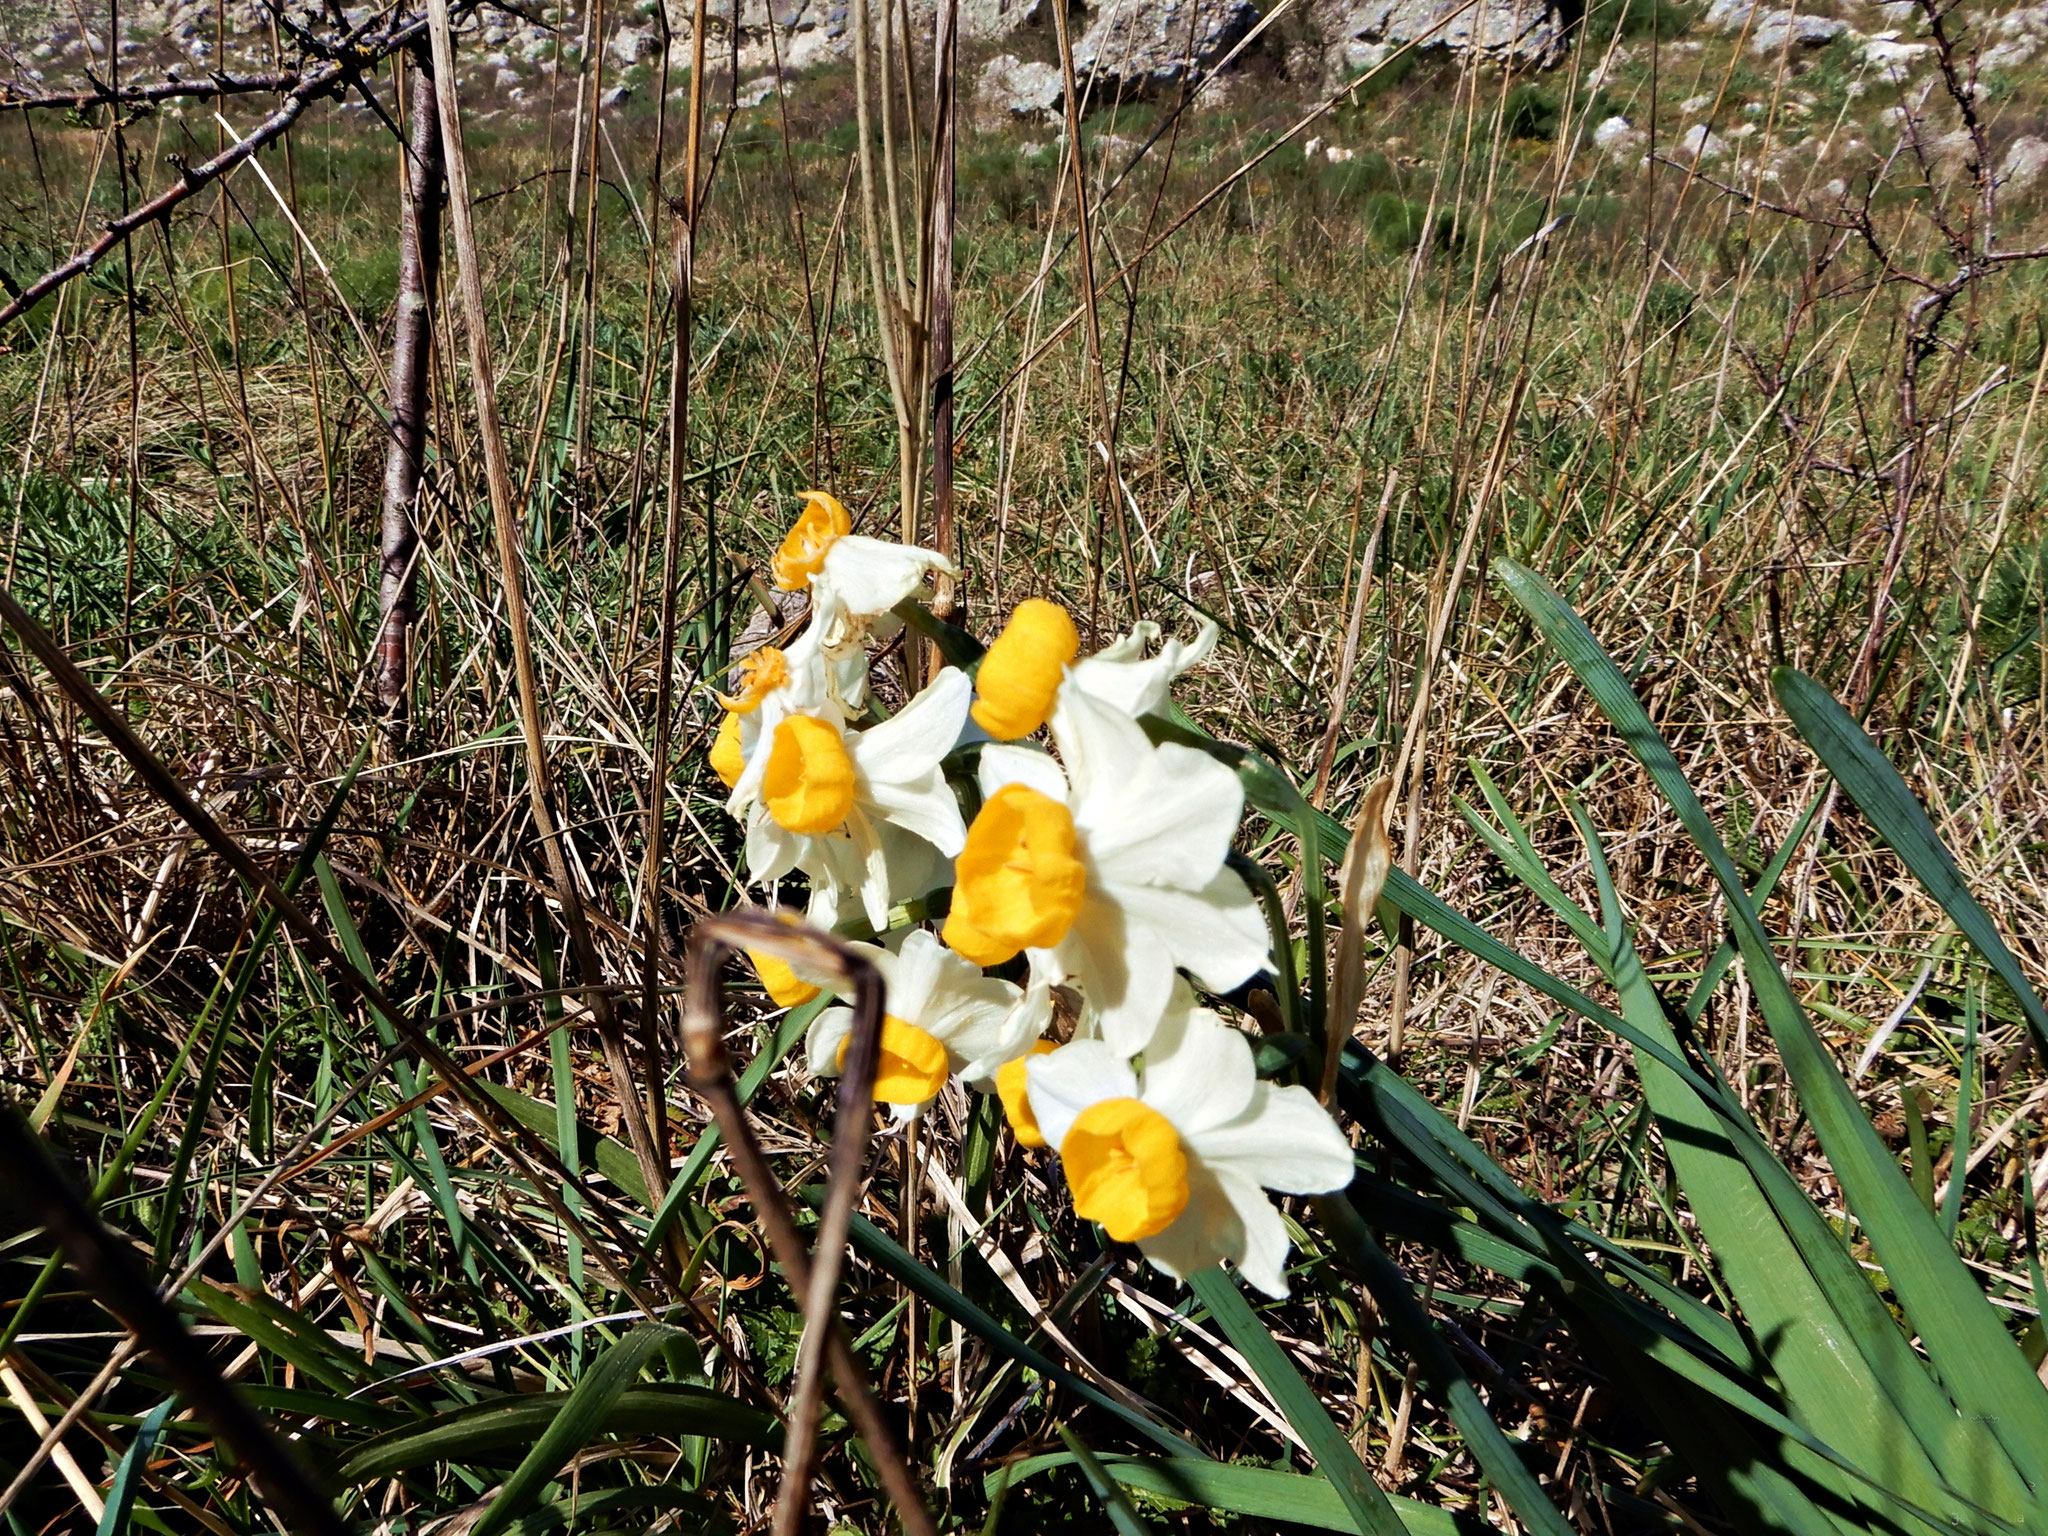 A Narcissus, and other beautiful flowers along the journey